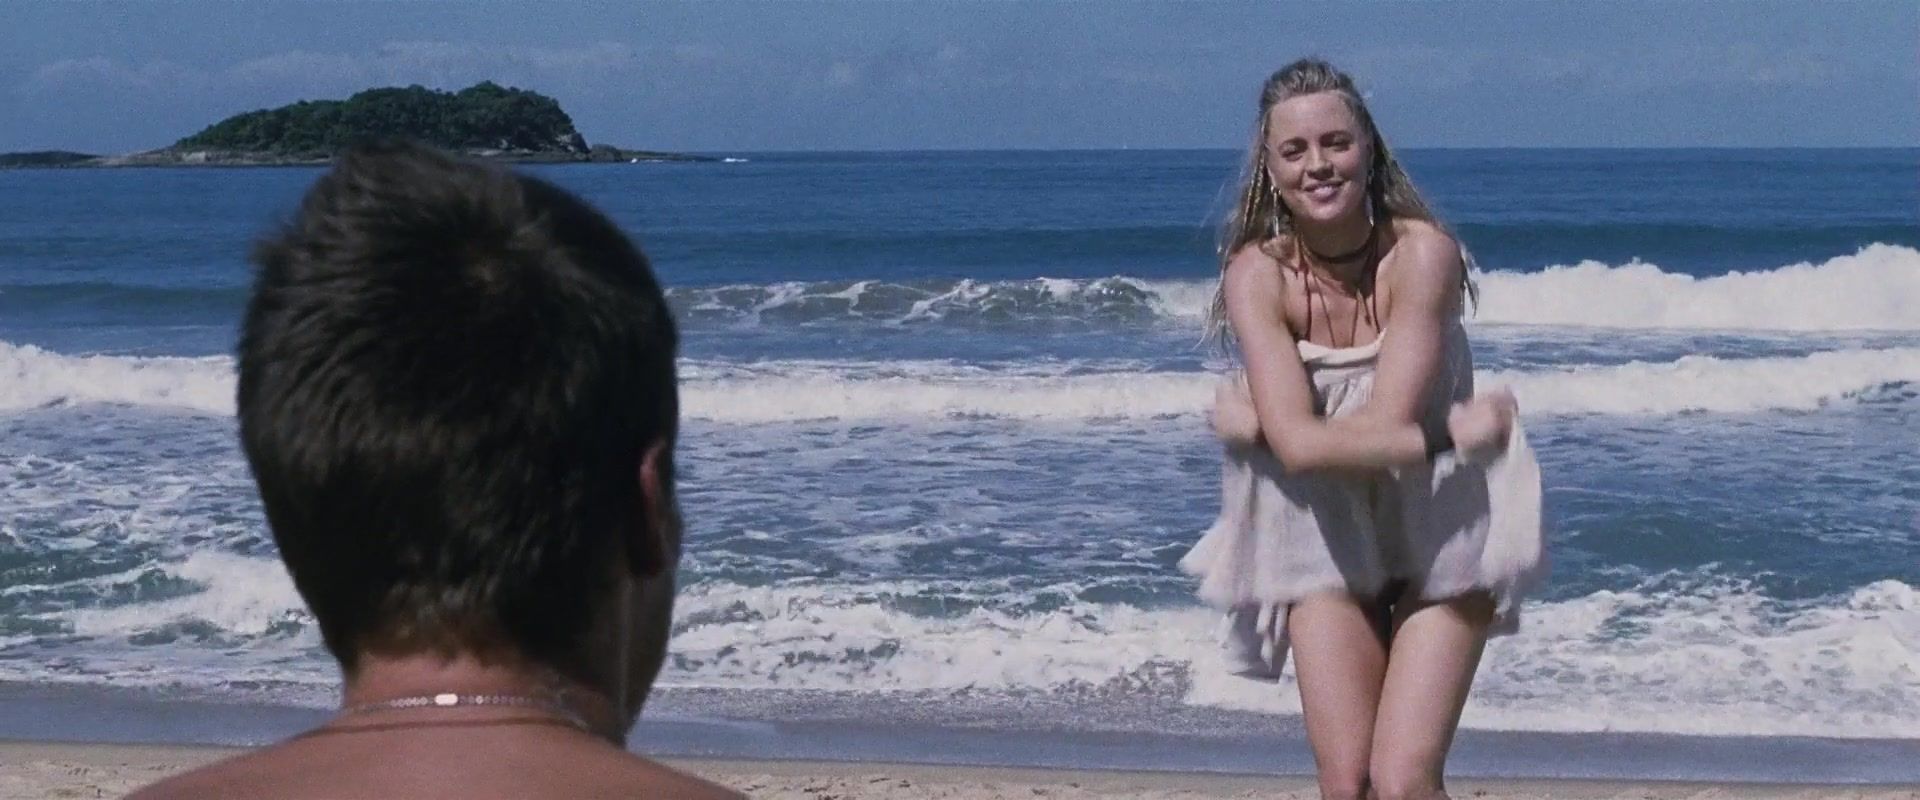 Adult-Empire Nude Topless Video | Celebrity: Beau Garrett, Melissa George | The movie "Turistas" | Released in 2006 Pigtails